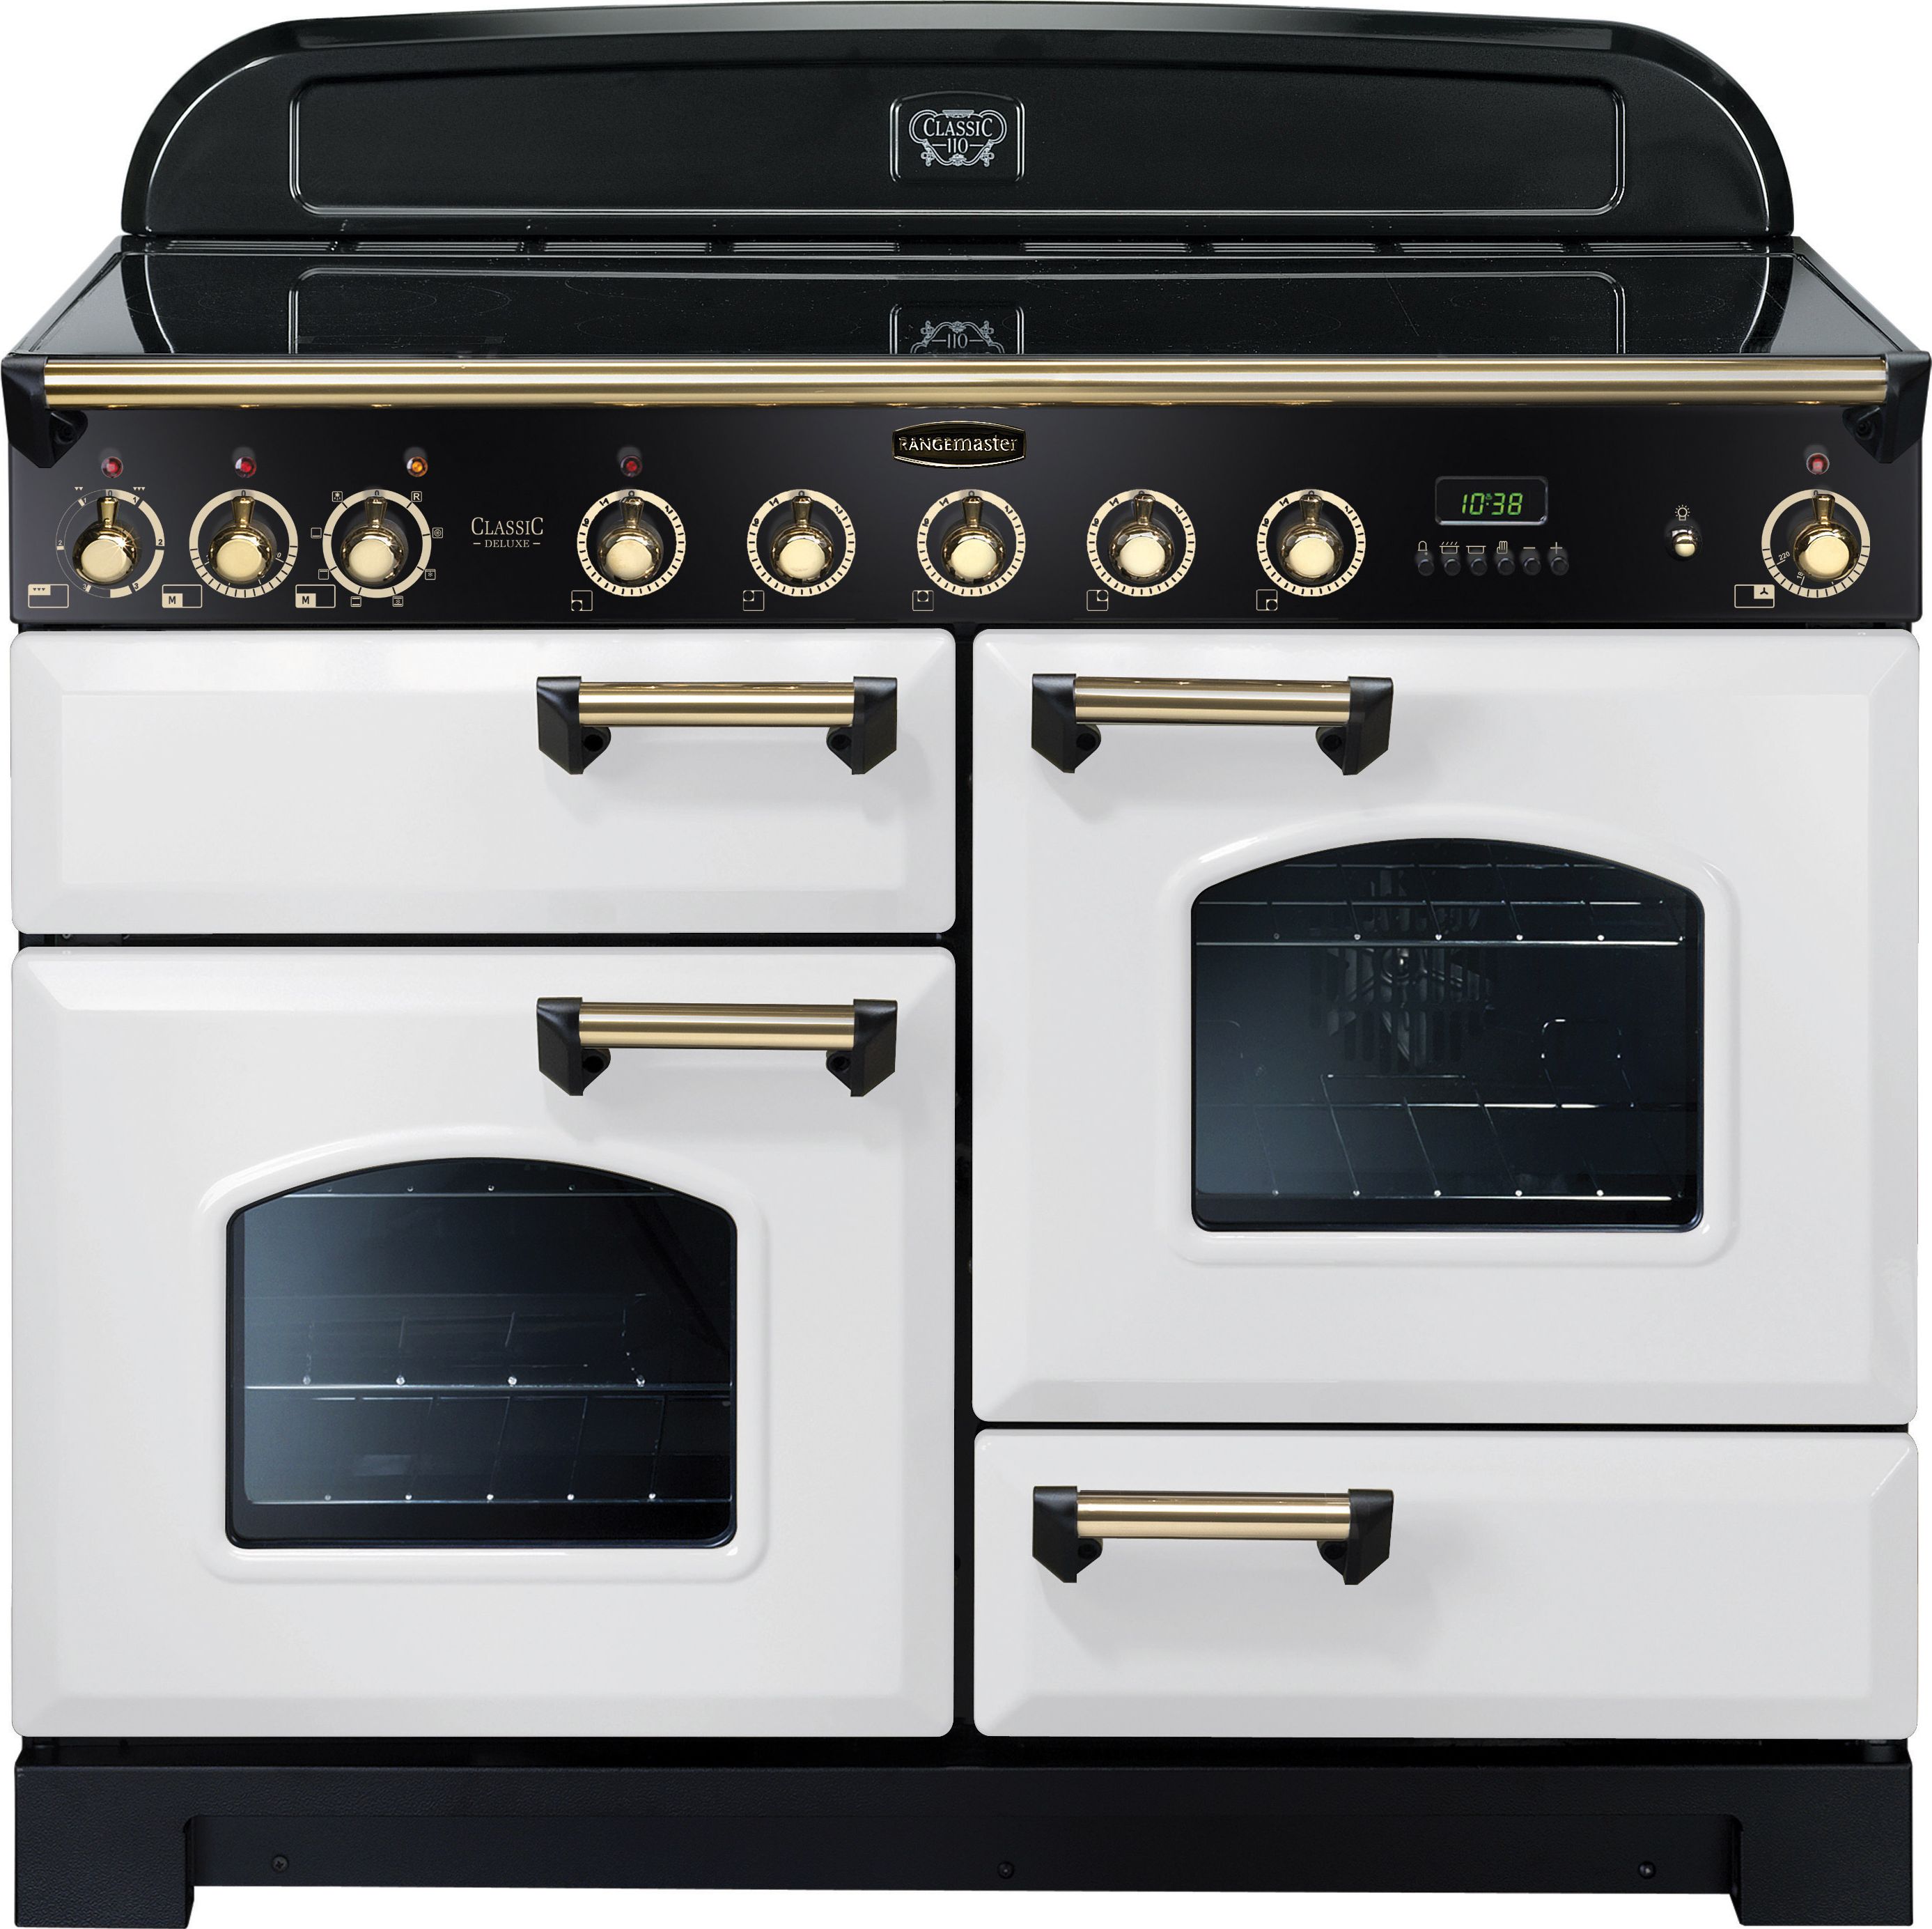 Rangemaster Classic Deluxe CDL110EIWH/B 110cm Electric Range Cooker with Induction Hob - White / Brass - A/A Rated, White